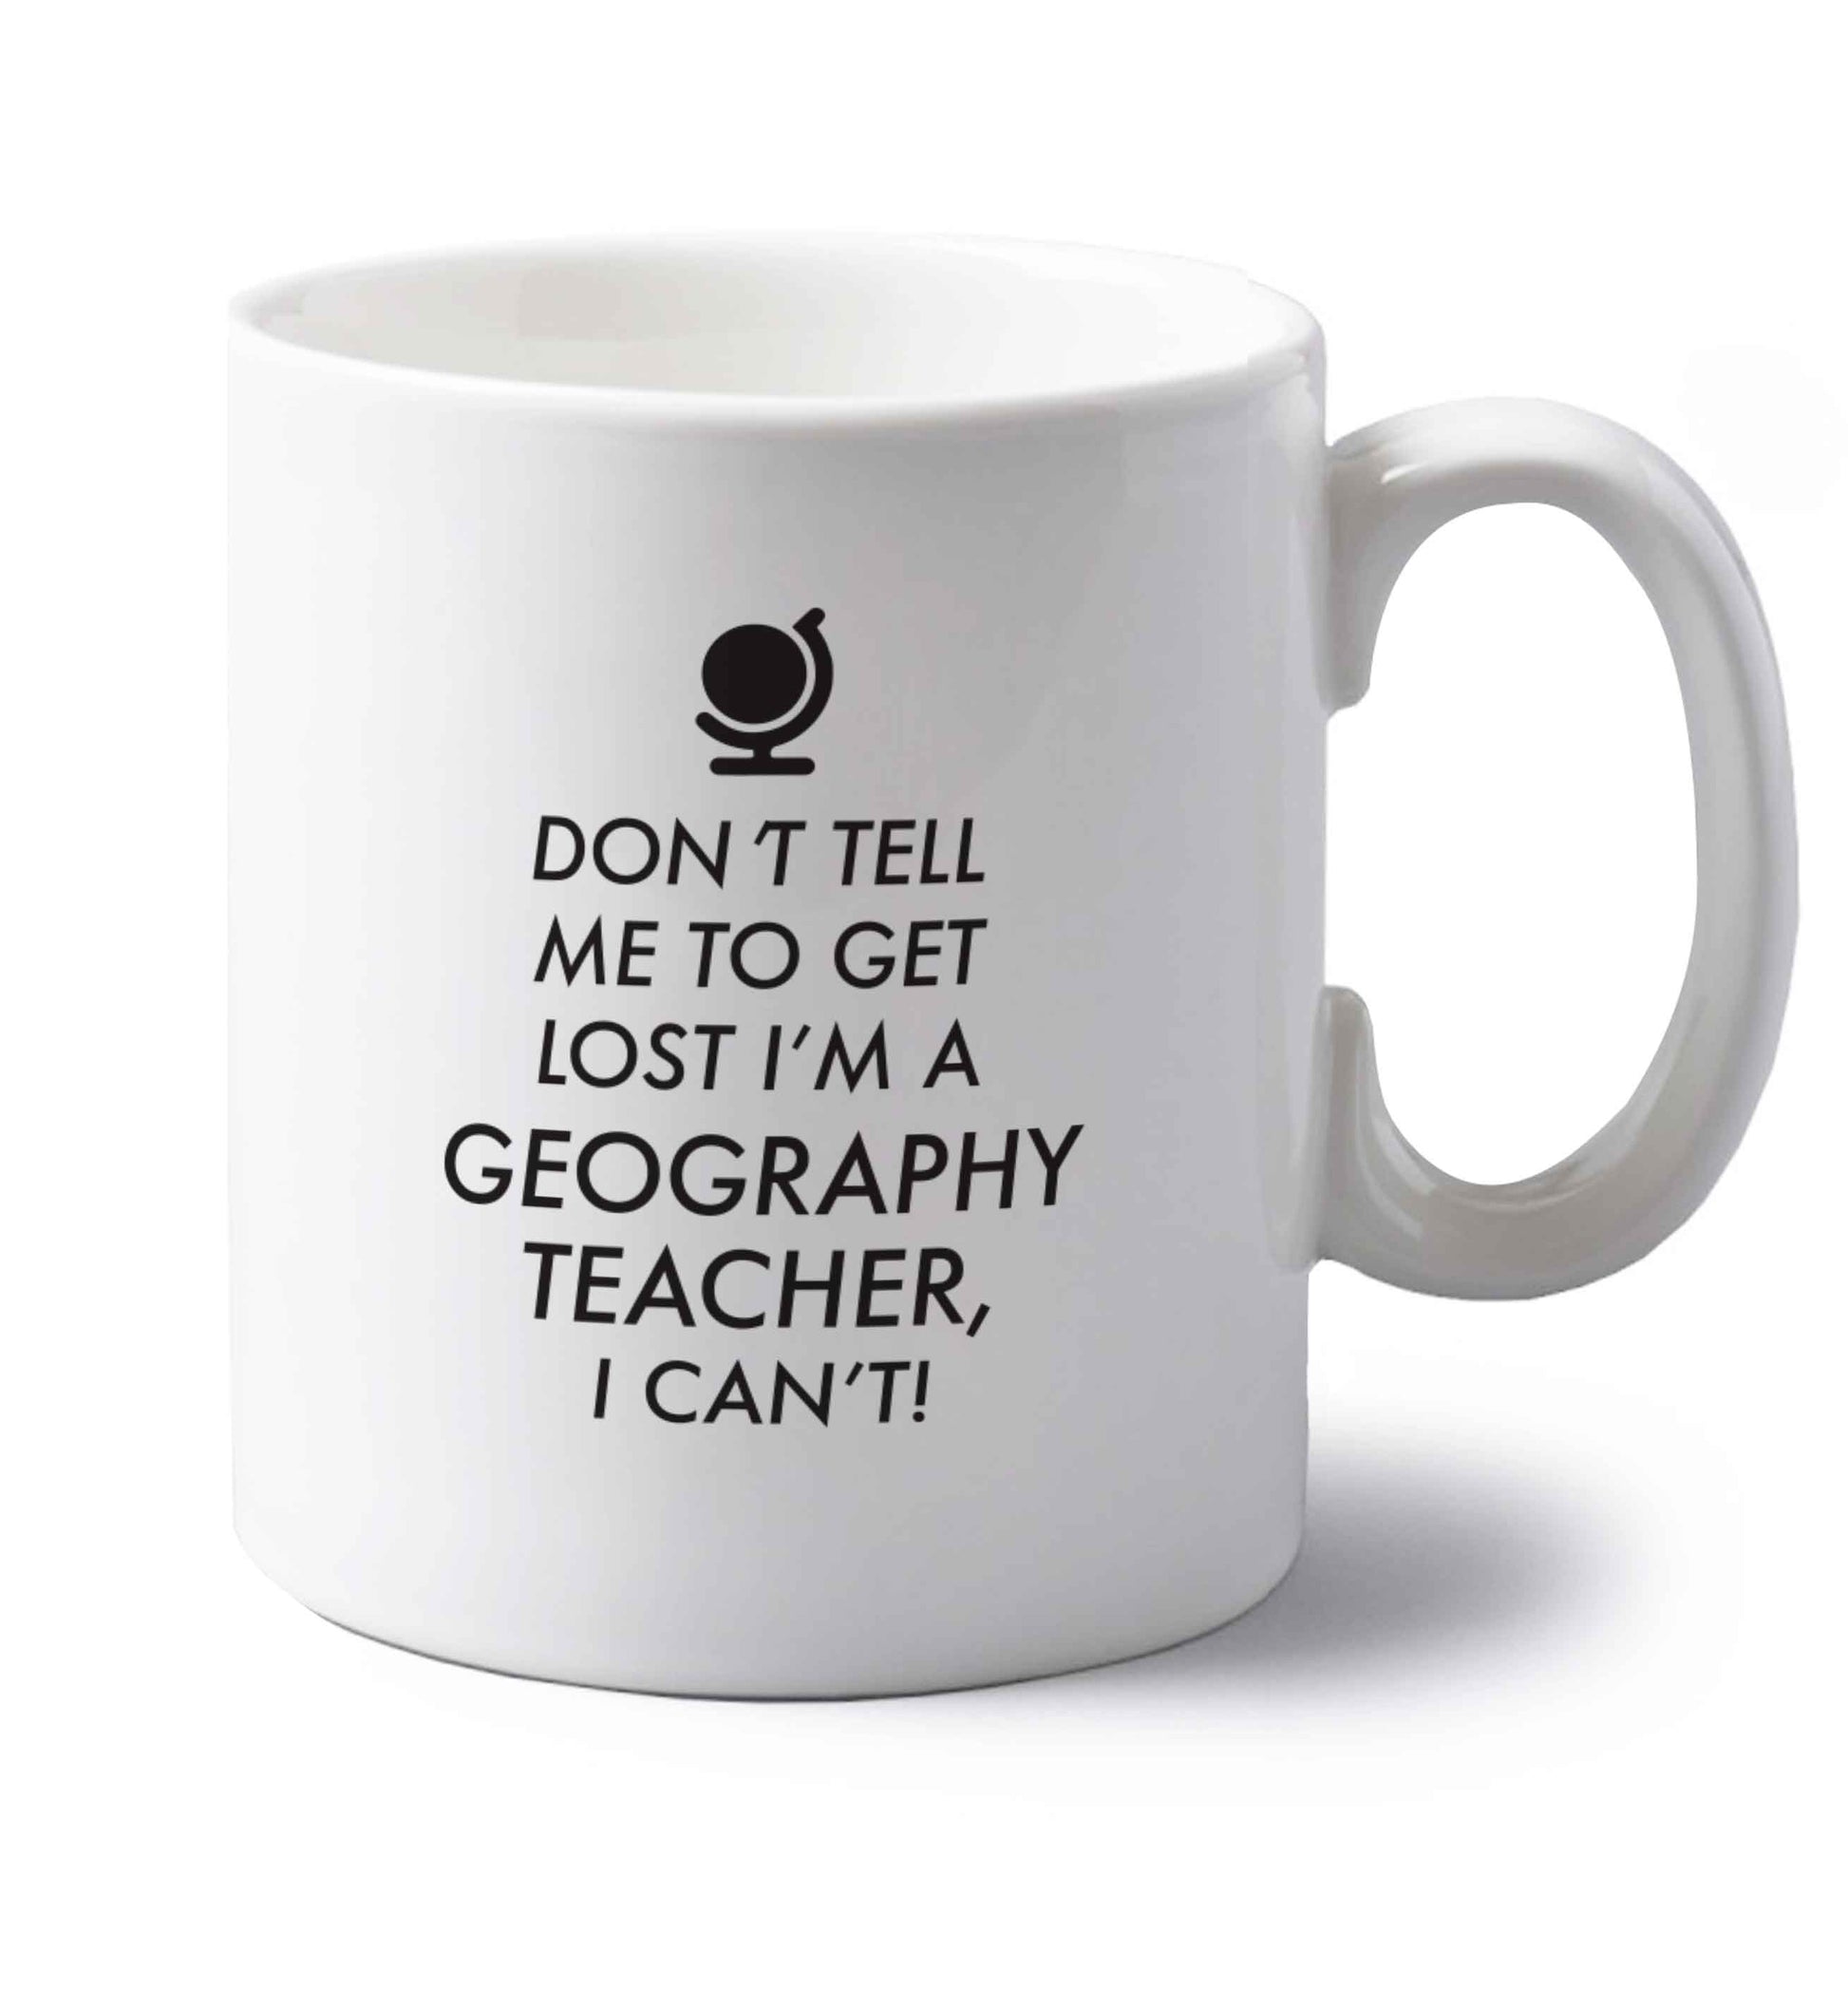 Don't tell me to get lost I'm a geography teacher, I can't left handed white ceramic mug 